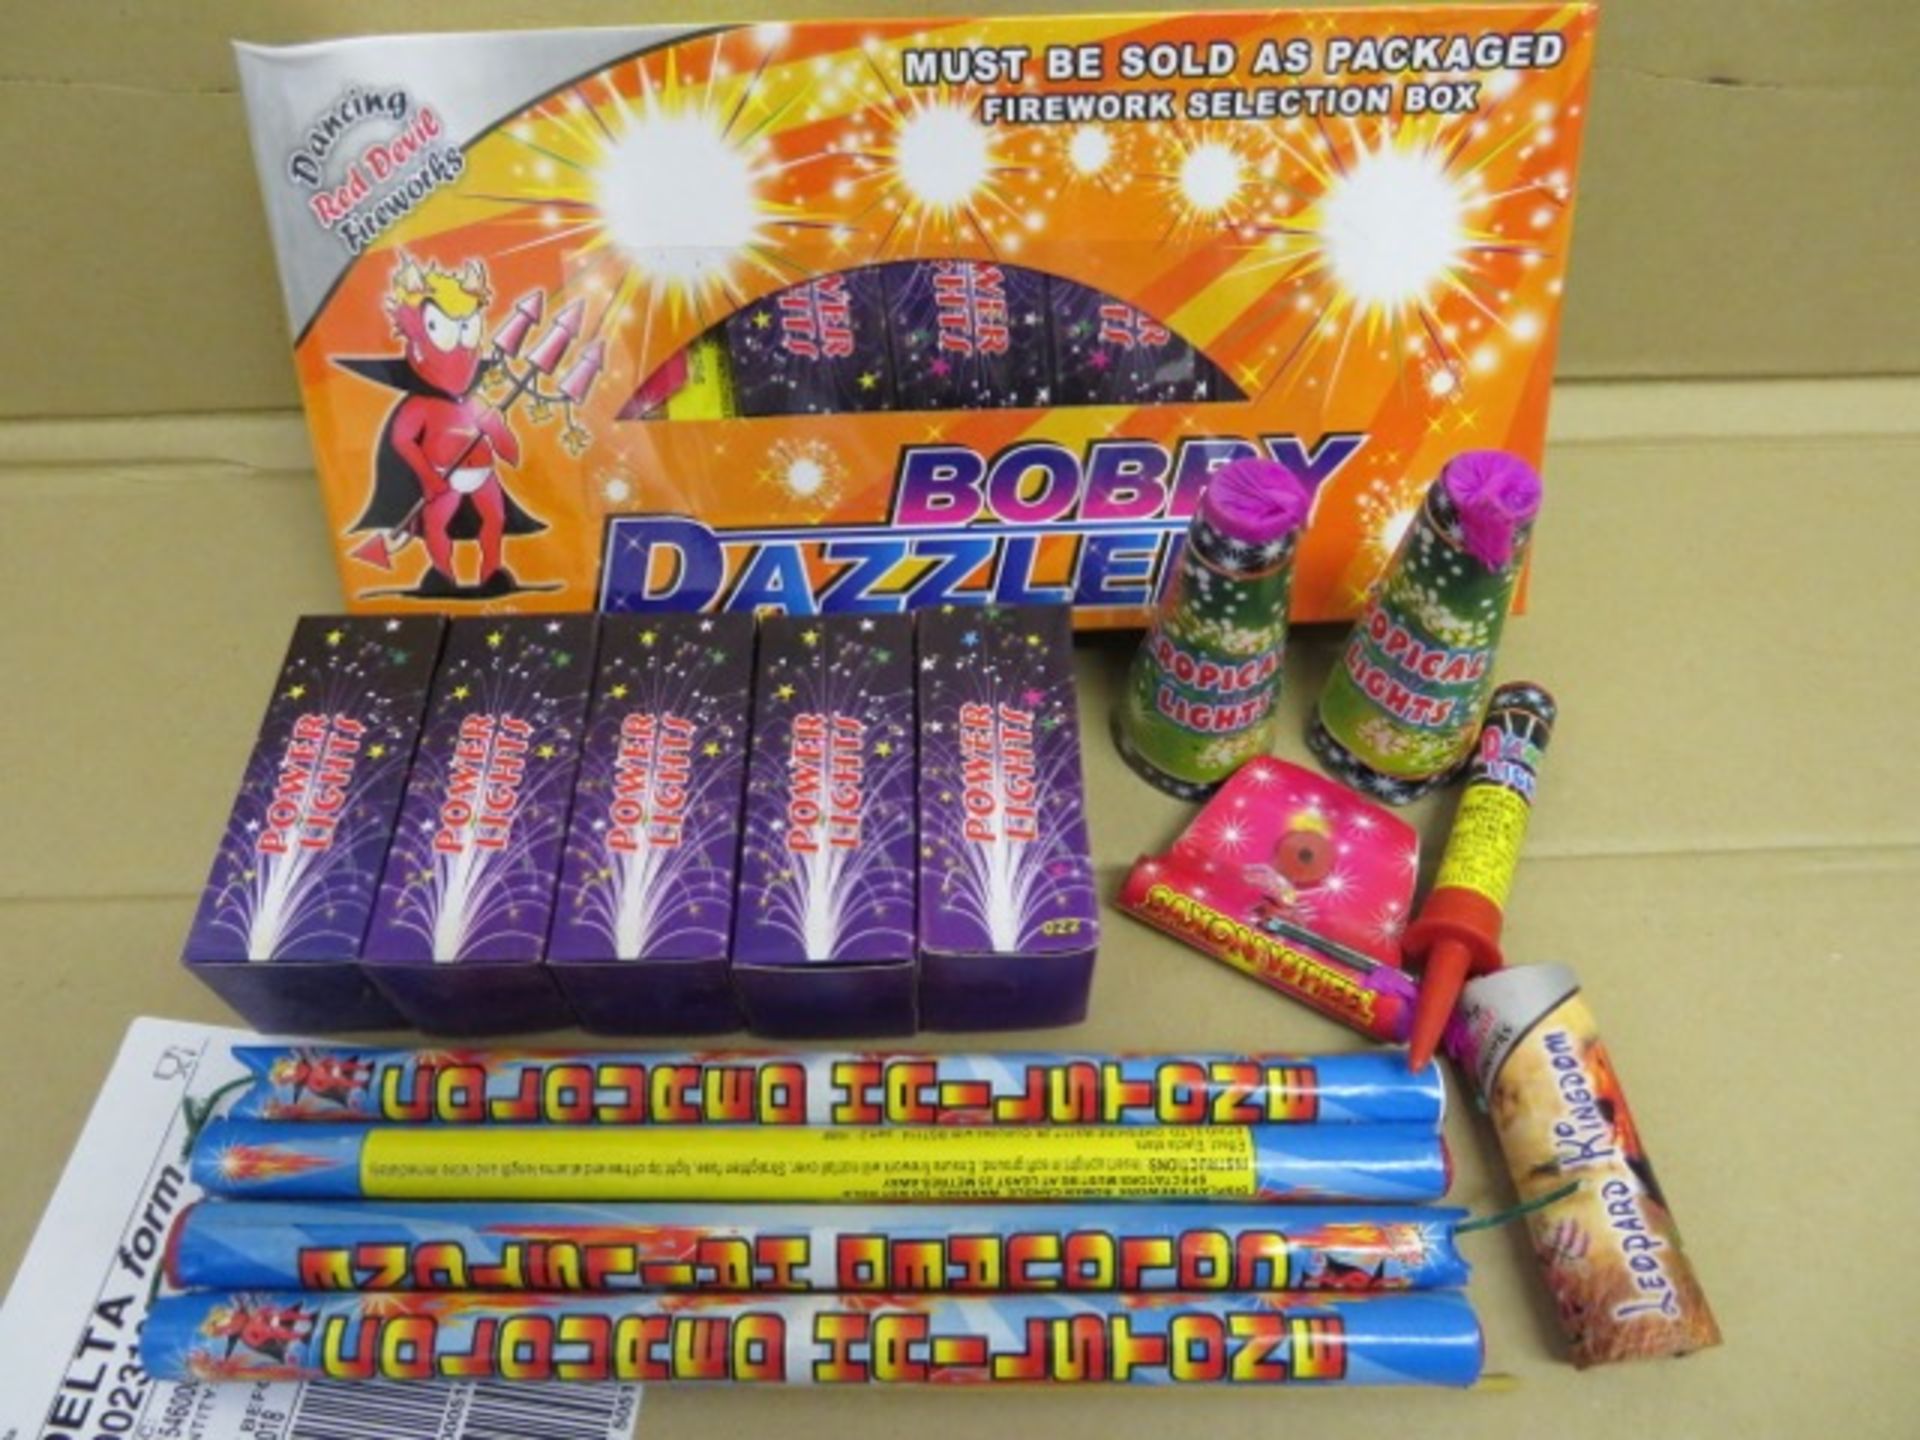 4 X 14 Piece Bobby Dazzler Firework Selection Boxes. Total Of 56 Fireworks To Include: 20 X Power